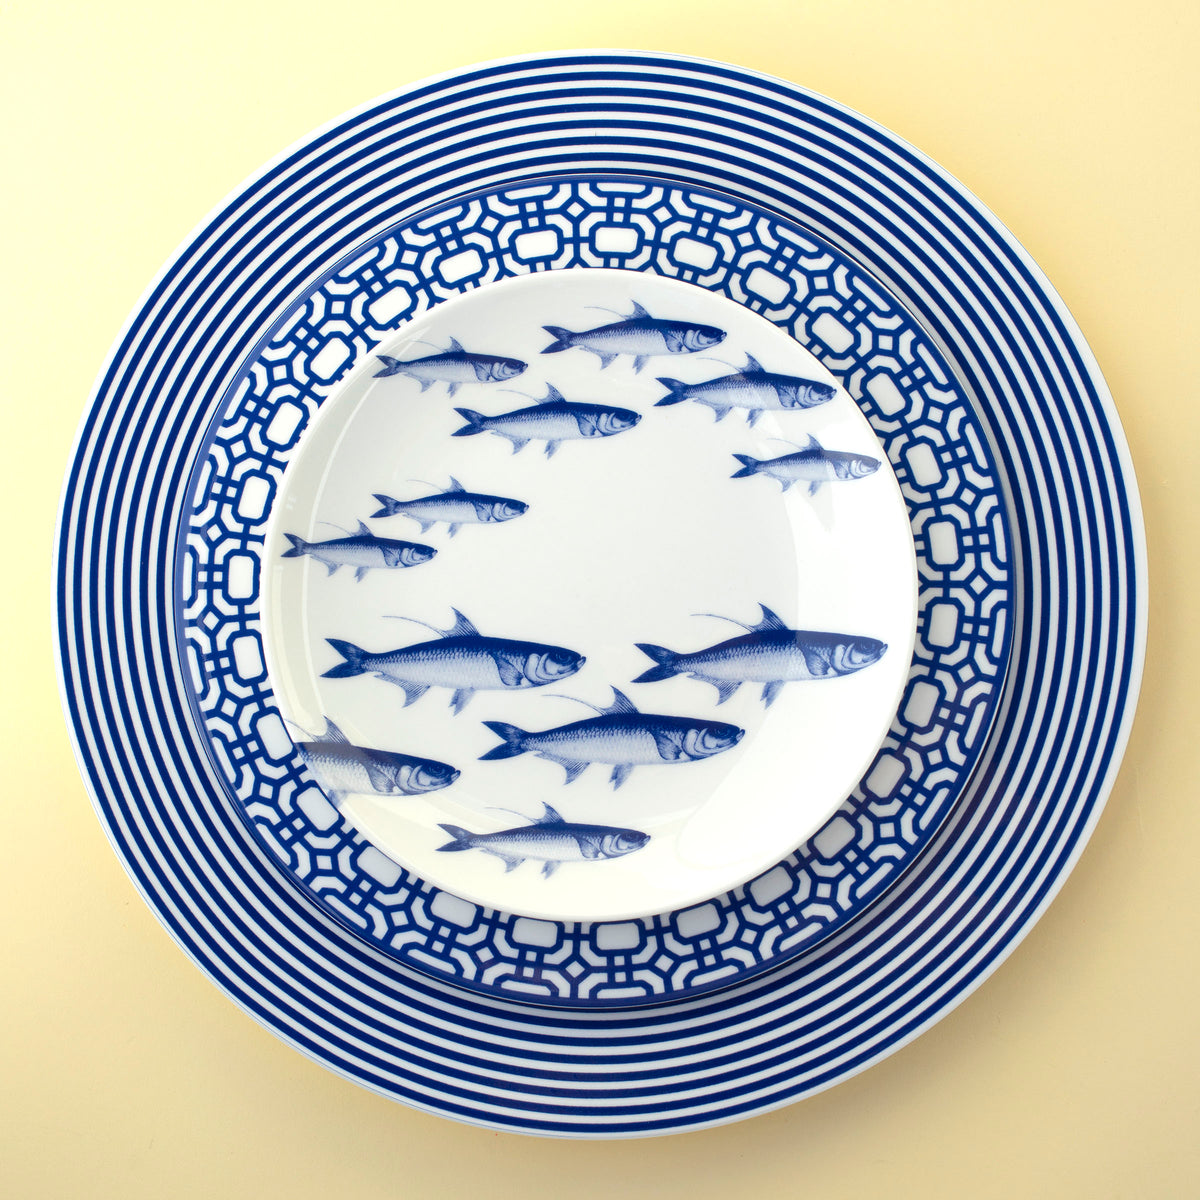 Three nested plates featuring different blue and white patterns; the top plate depicts a school of fish, the middle plate a geometric pattern, and the bottom plate has concentric stripes. The School of Fish Small Plates from Caskata Artisanal Home are microwave safe, heirloom-quality dinnerware that brings both beauty and practicality to any table setting.